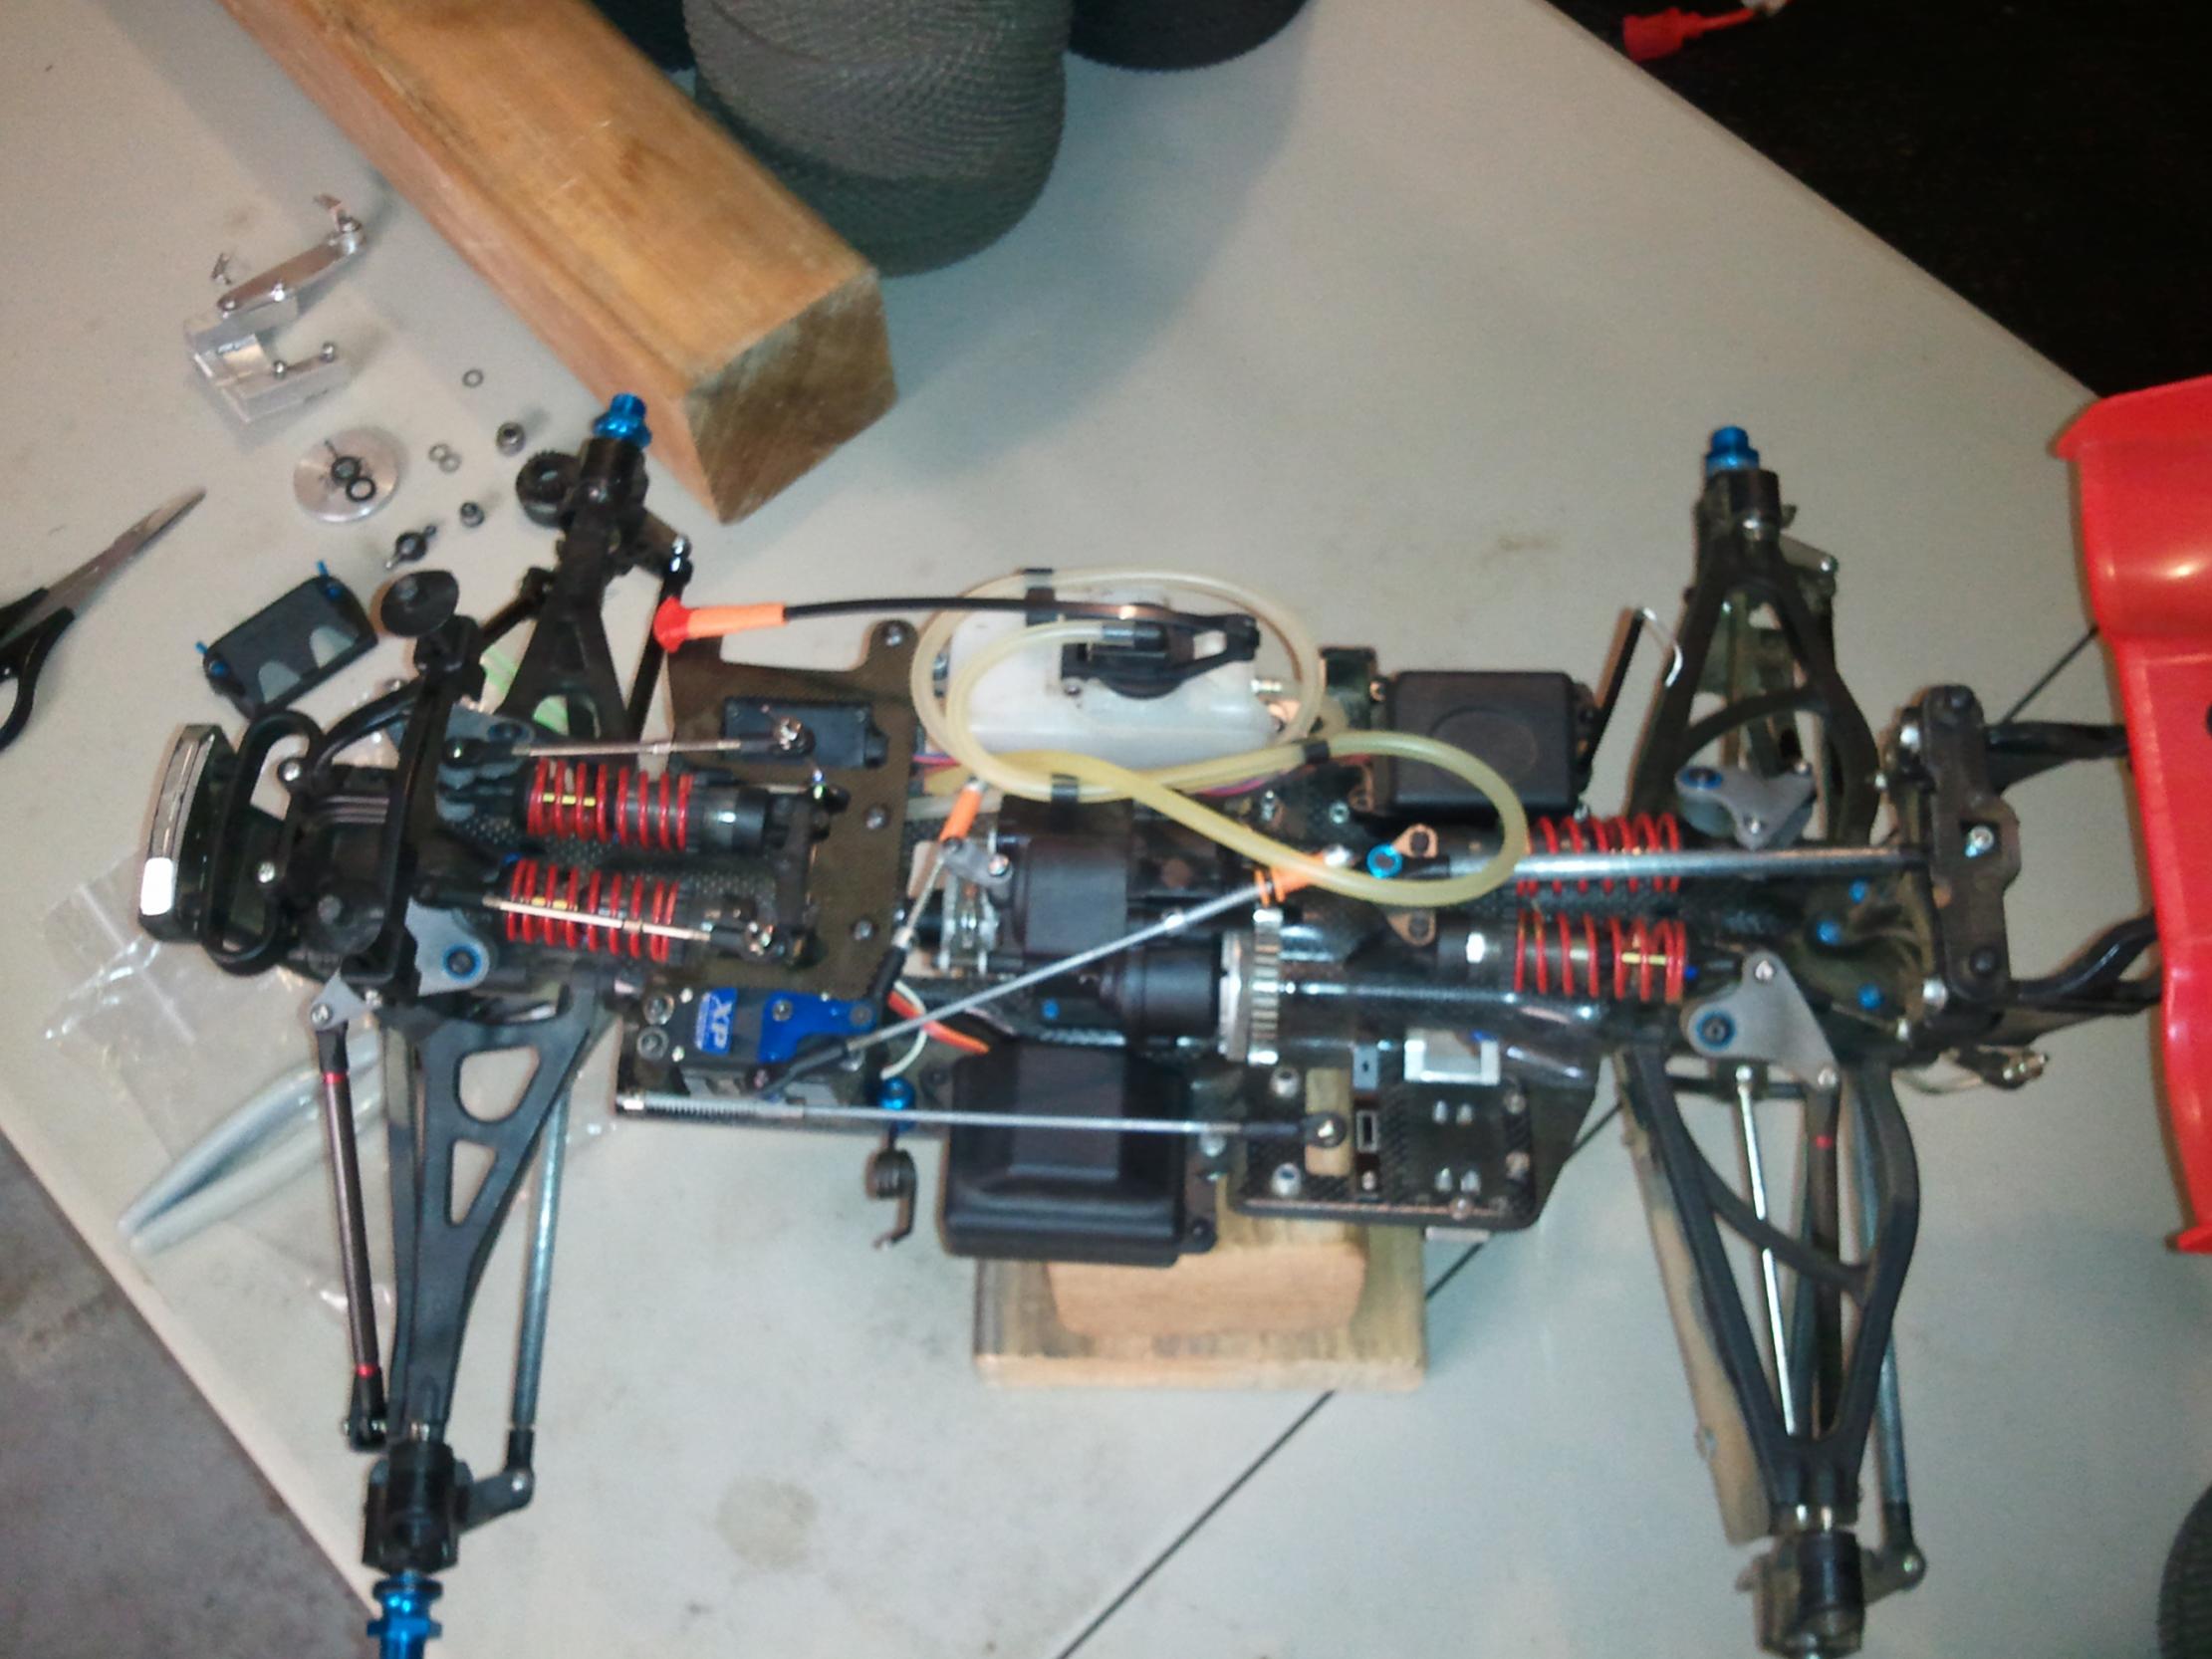 Revo 3.3 upgrades for race? - R/C Tech Forums